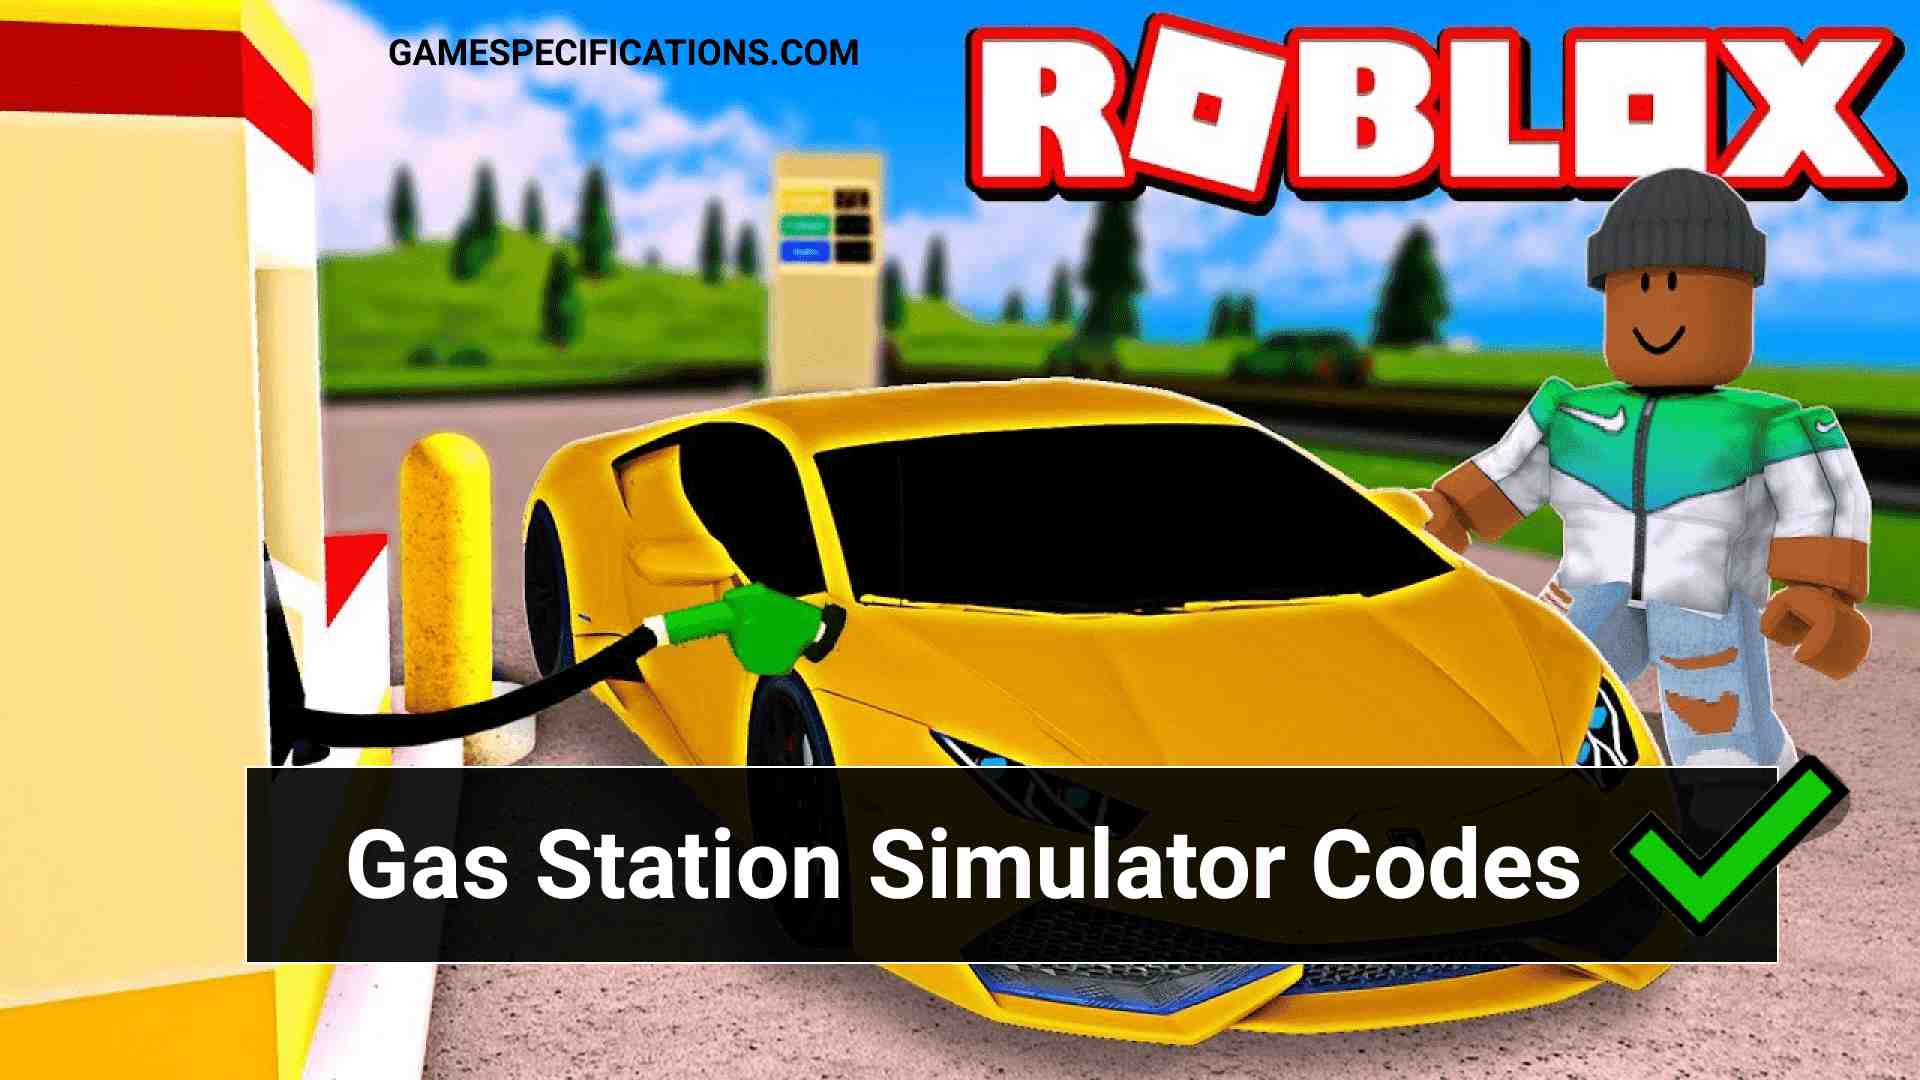 Roblox Gas Station Simulator Codes July 2021 Game Specifications - oil simulator roblox twitter